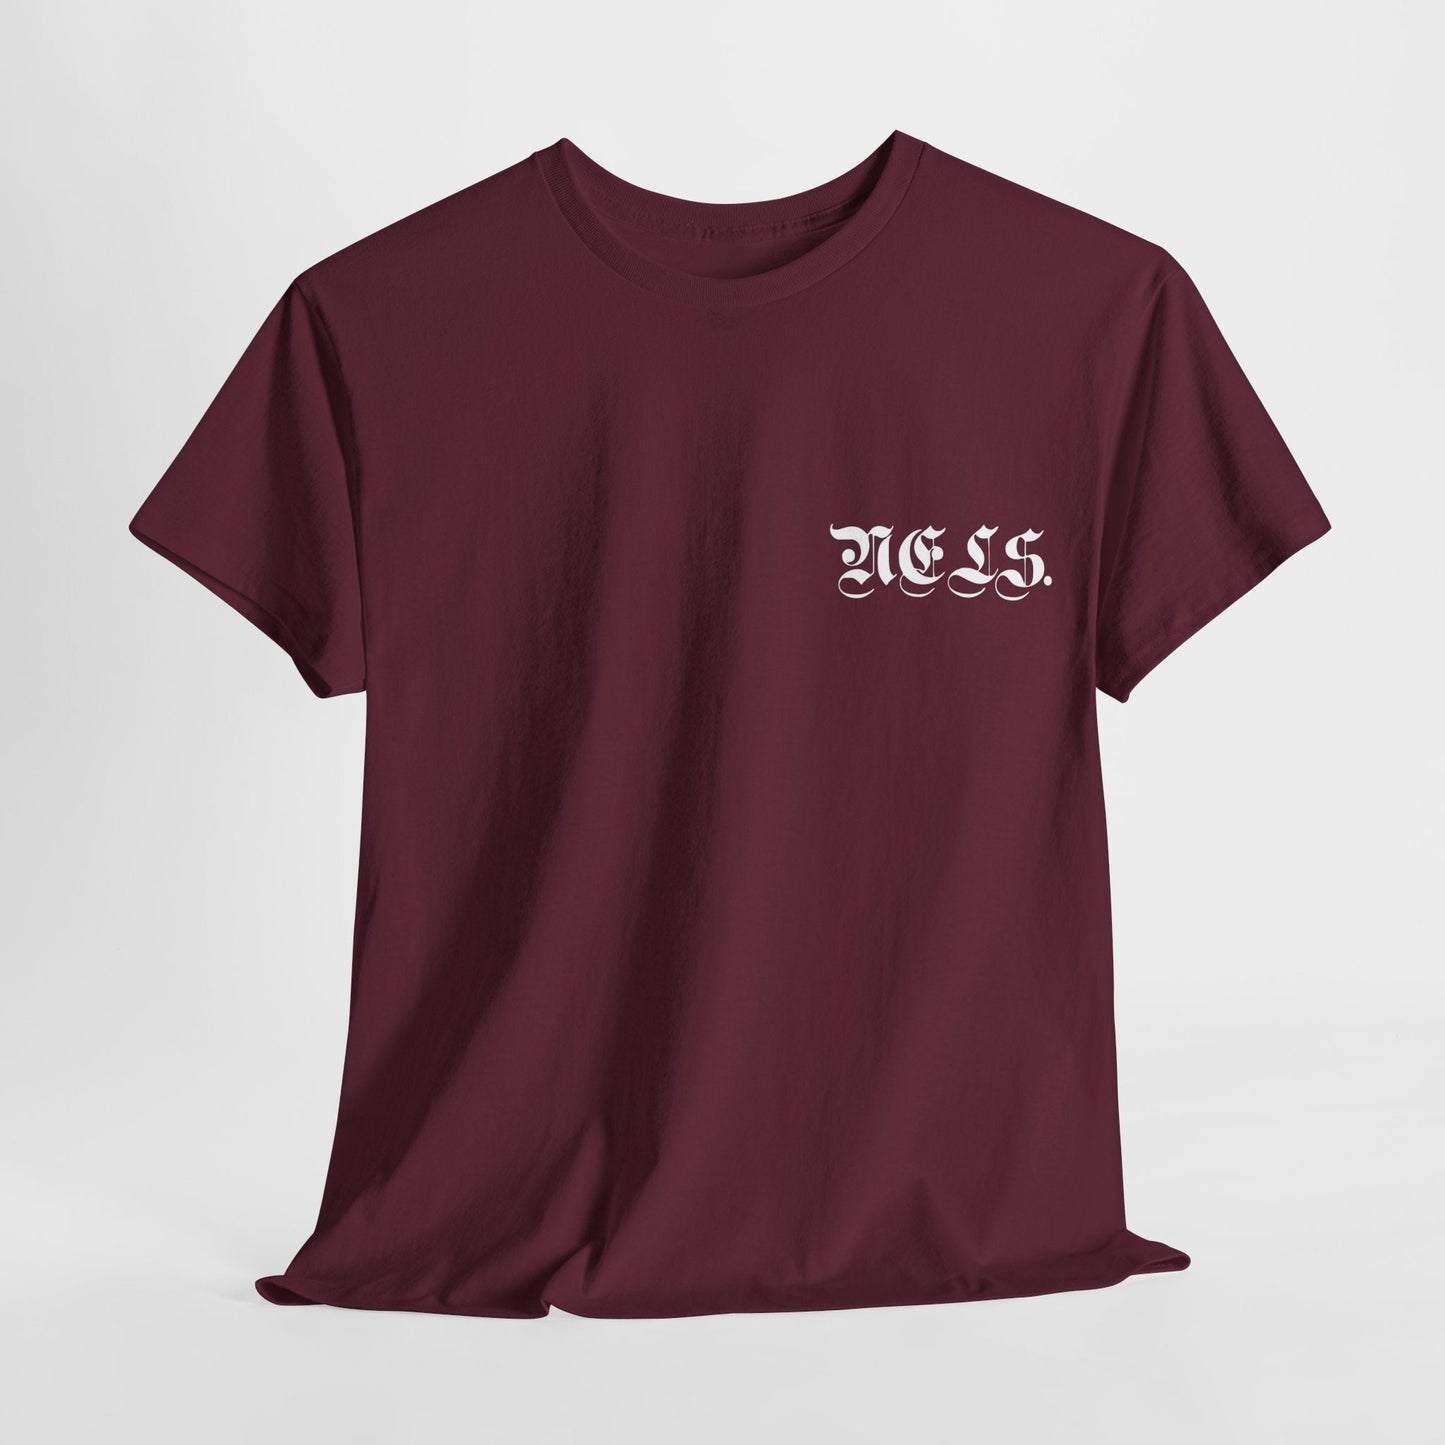 Tee NELS. Live Life In Full Bloom Front and Back - NELS.